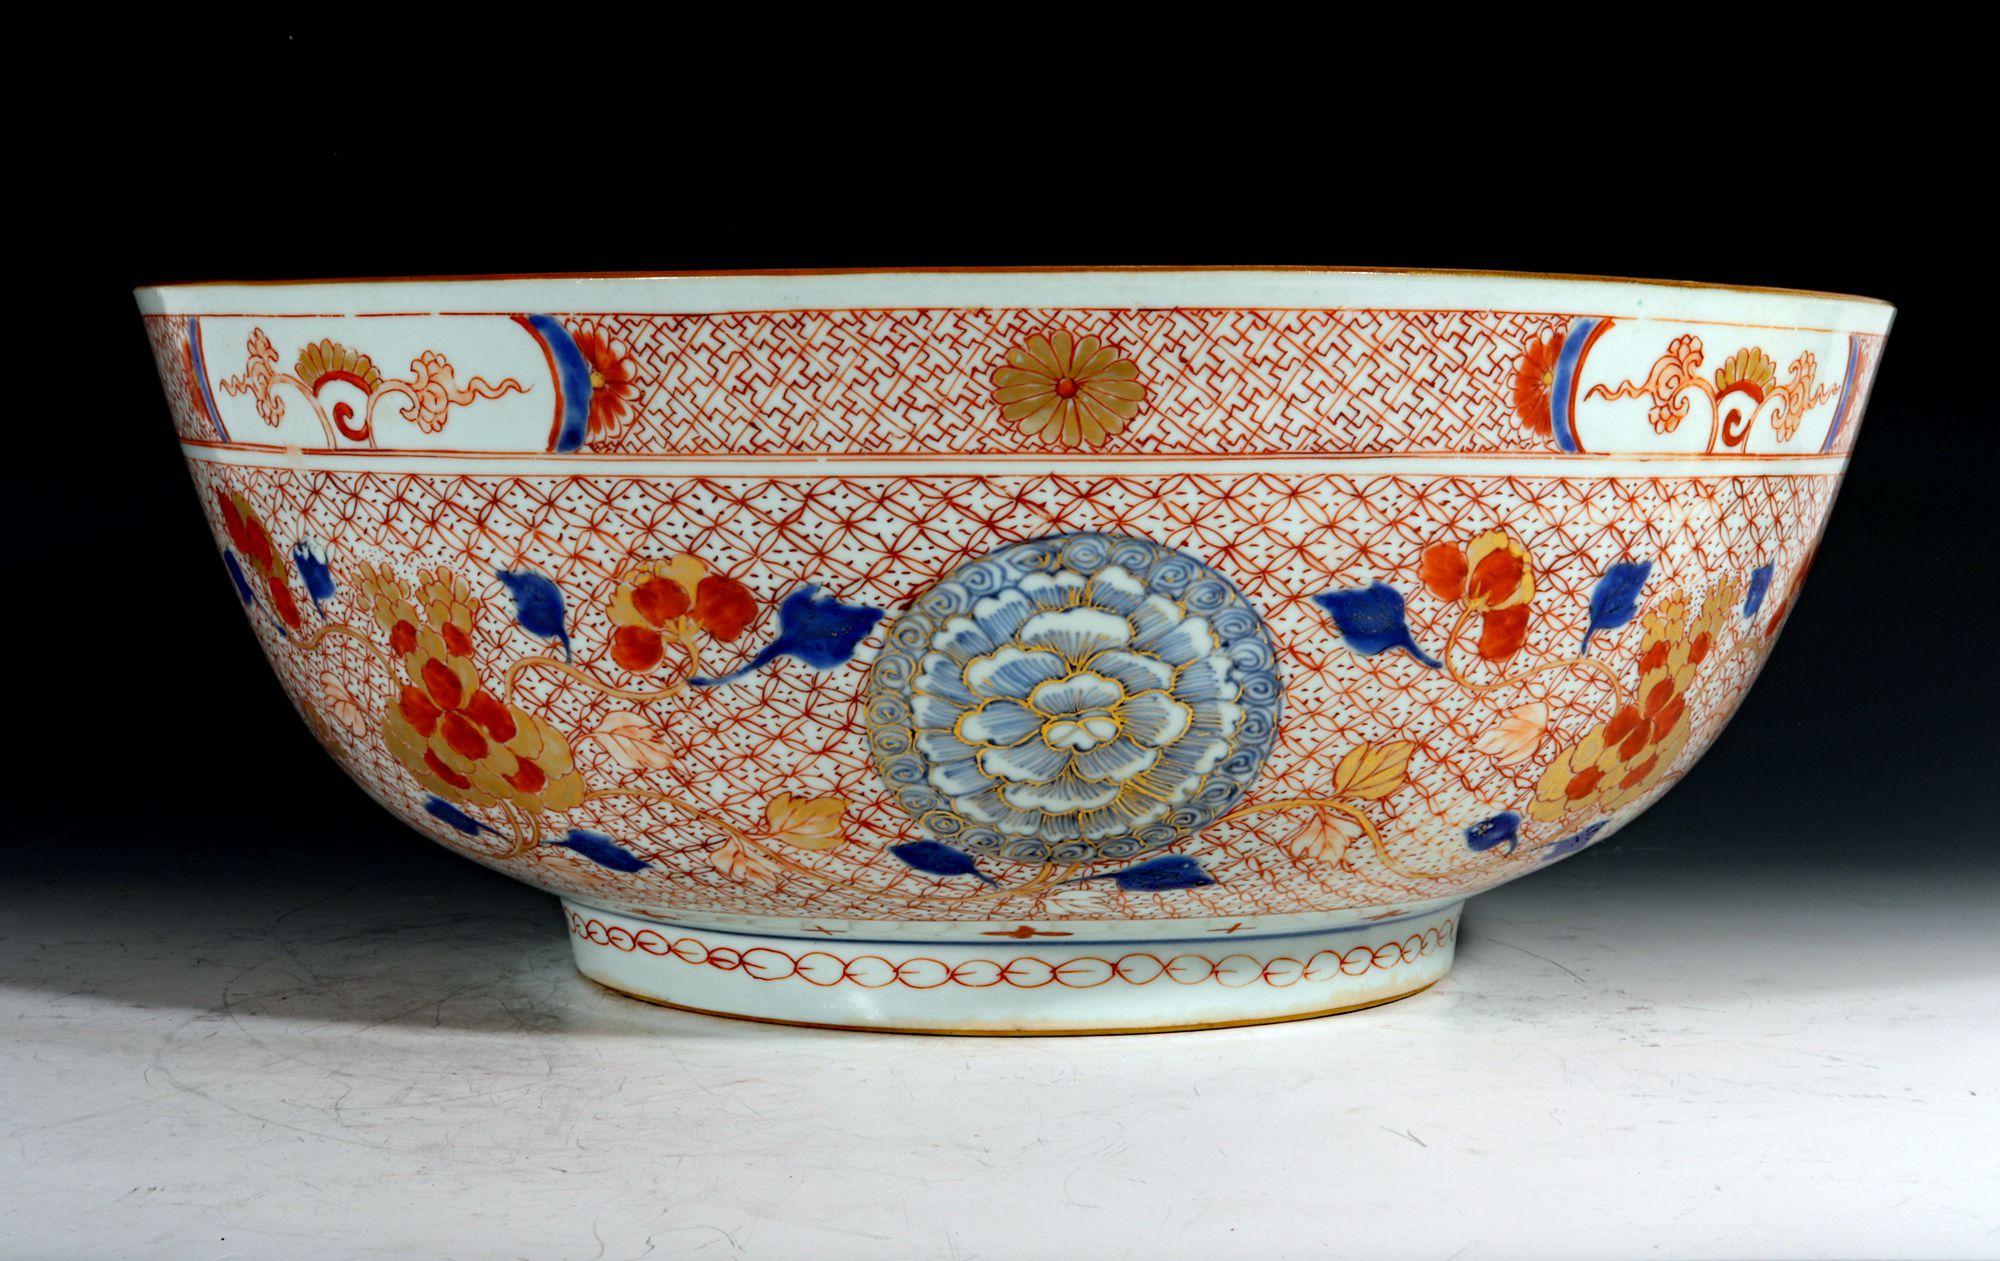 Chinese Export Porcelain Rouge de Fer Large Punch Bowl,
Imari,
circa 1735-50

The Chinese Export porcelain large Imari punch bowl is painted on the exterior with underglaze blue and gold chrysanthemums and iron-red and gilt scrolling branches